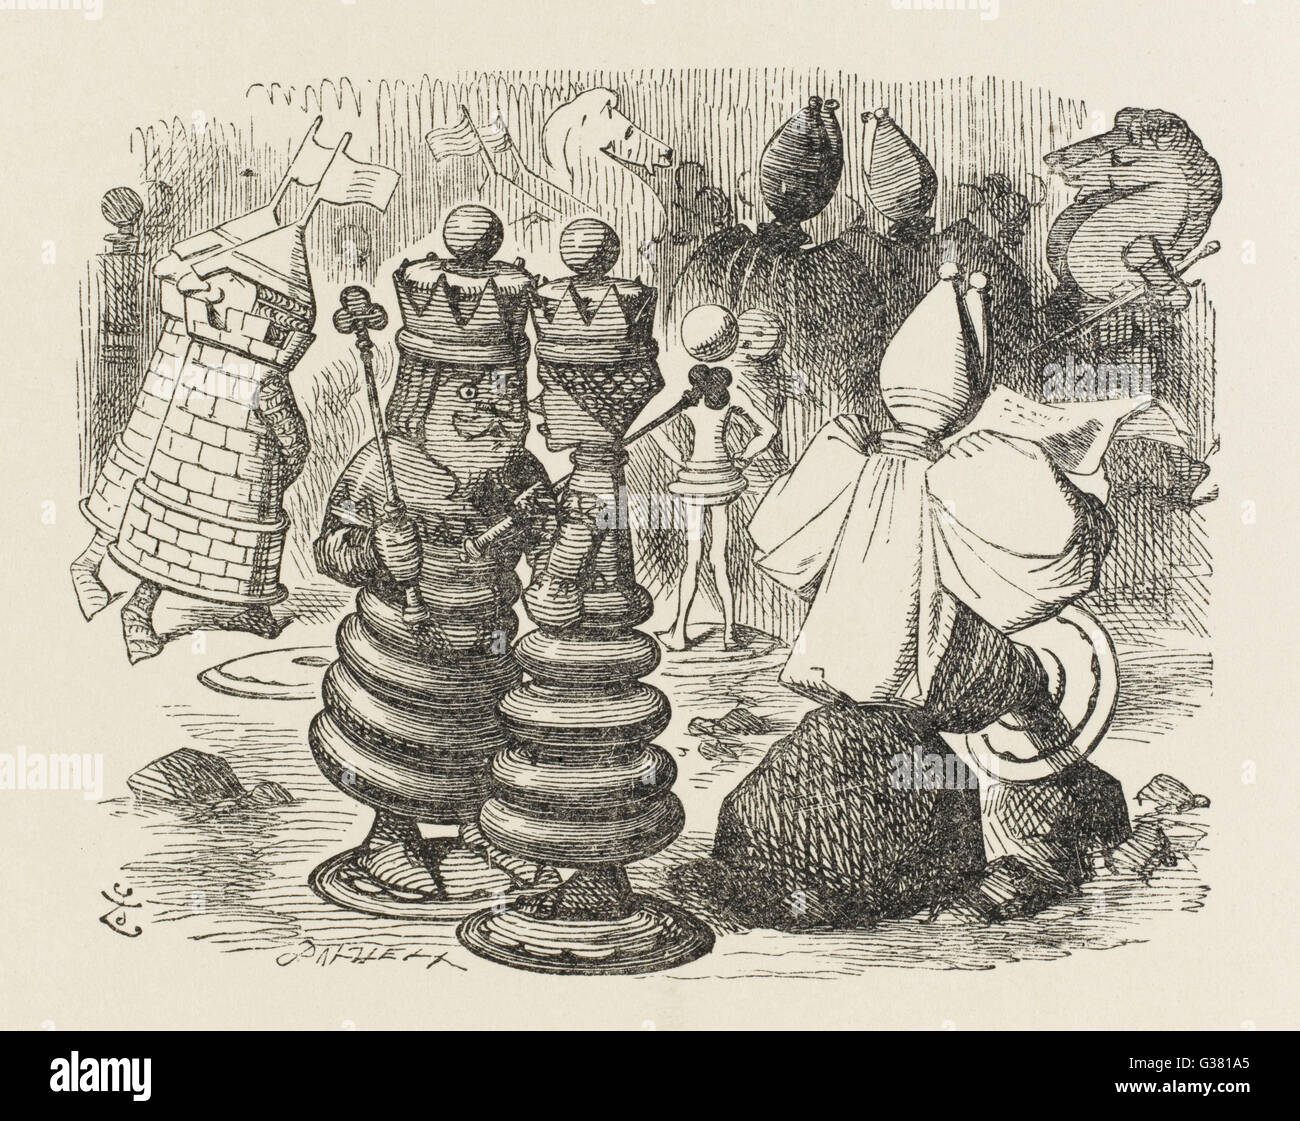 CHESSPIECE  The chesspieces in animated conversation      Date: First published: 1872 Stock Photo